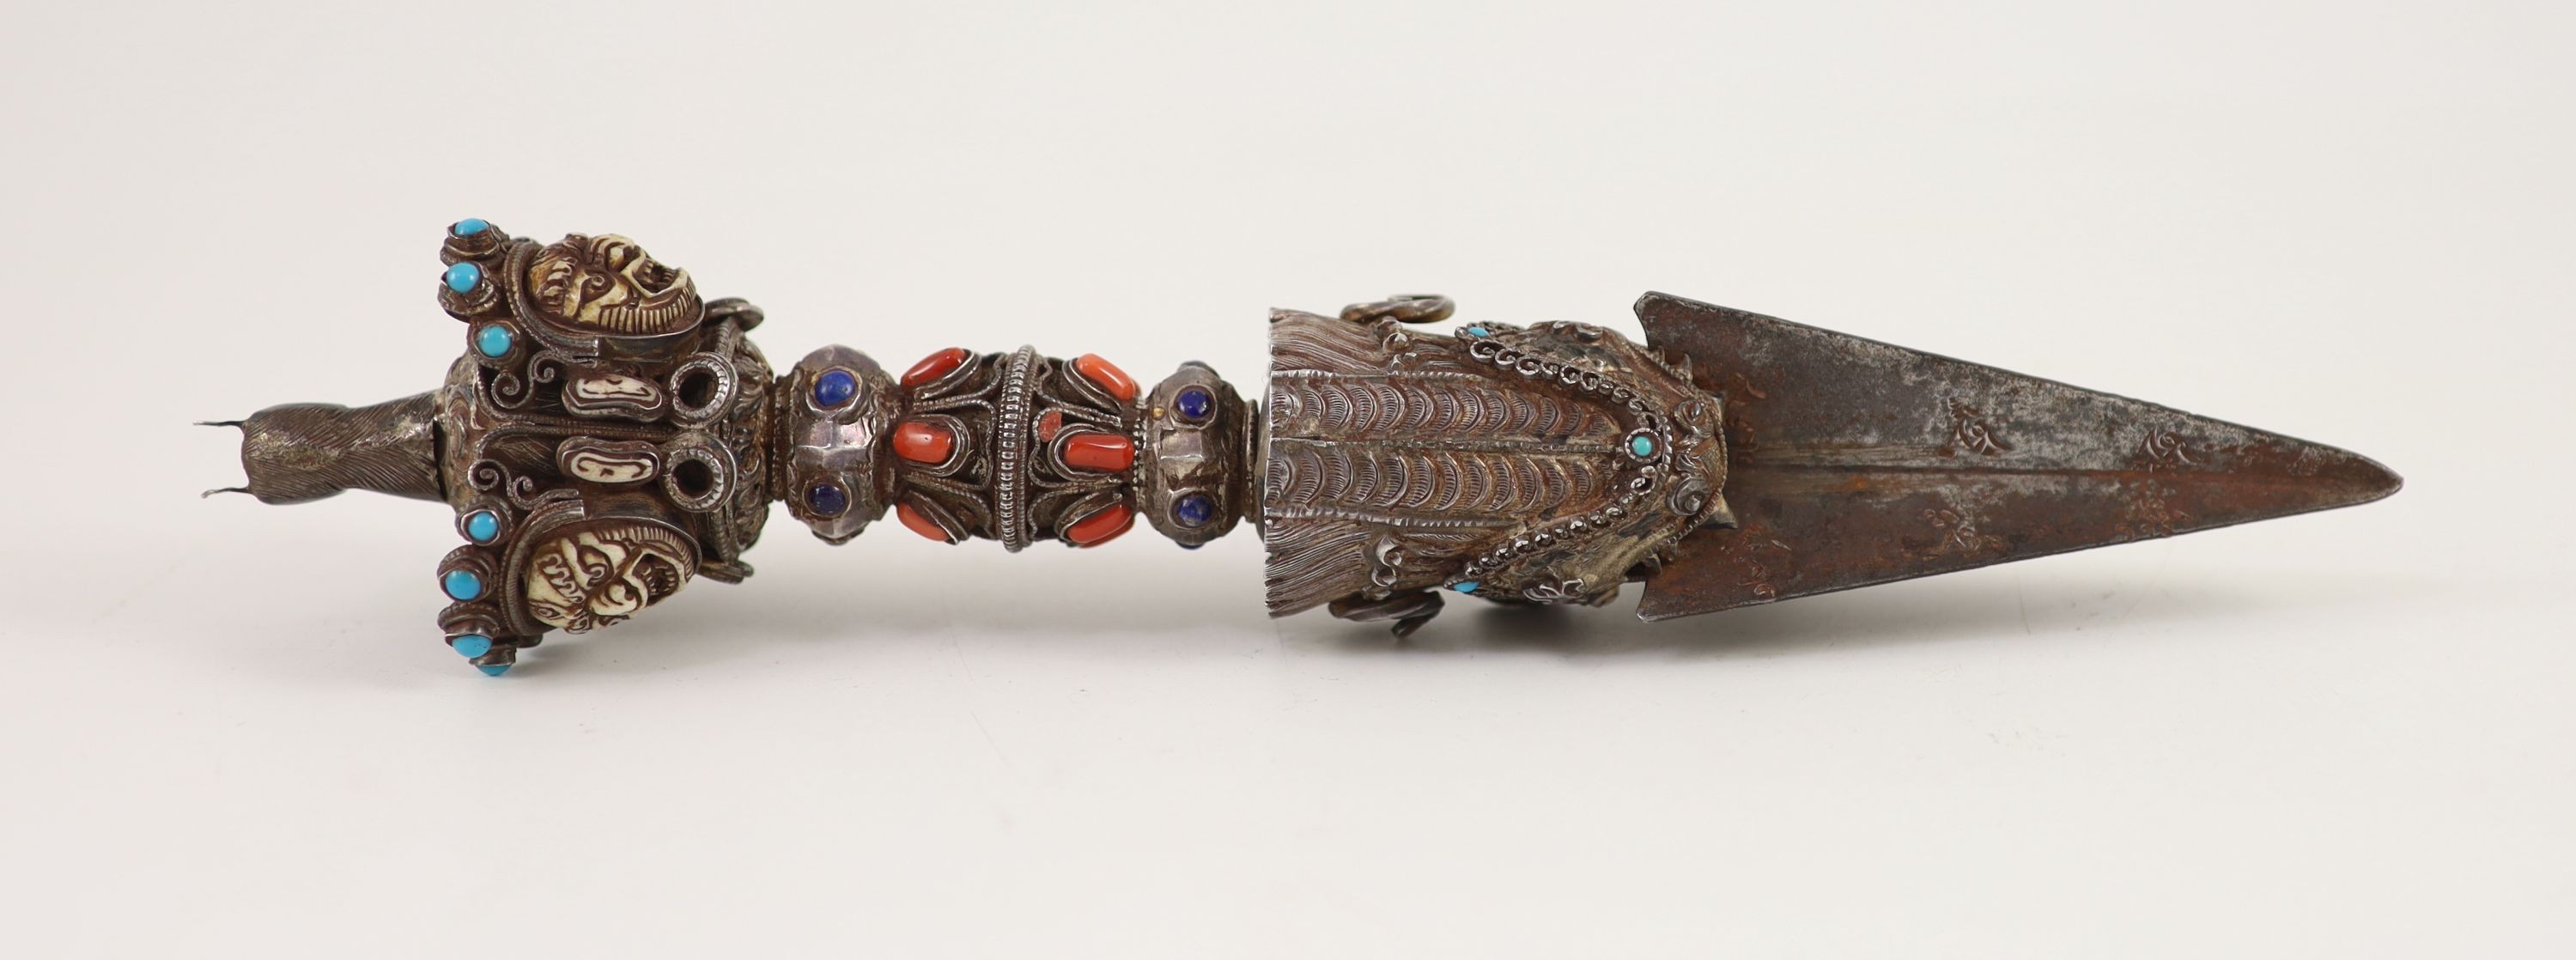 A Tibetan silver, bone and gem set phurbu (ritual dagger), 19th/20th century, 27.5 cm long, some of the stones replaced with glass